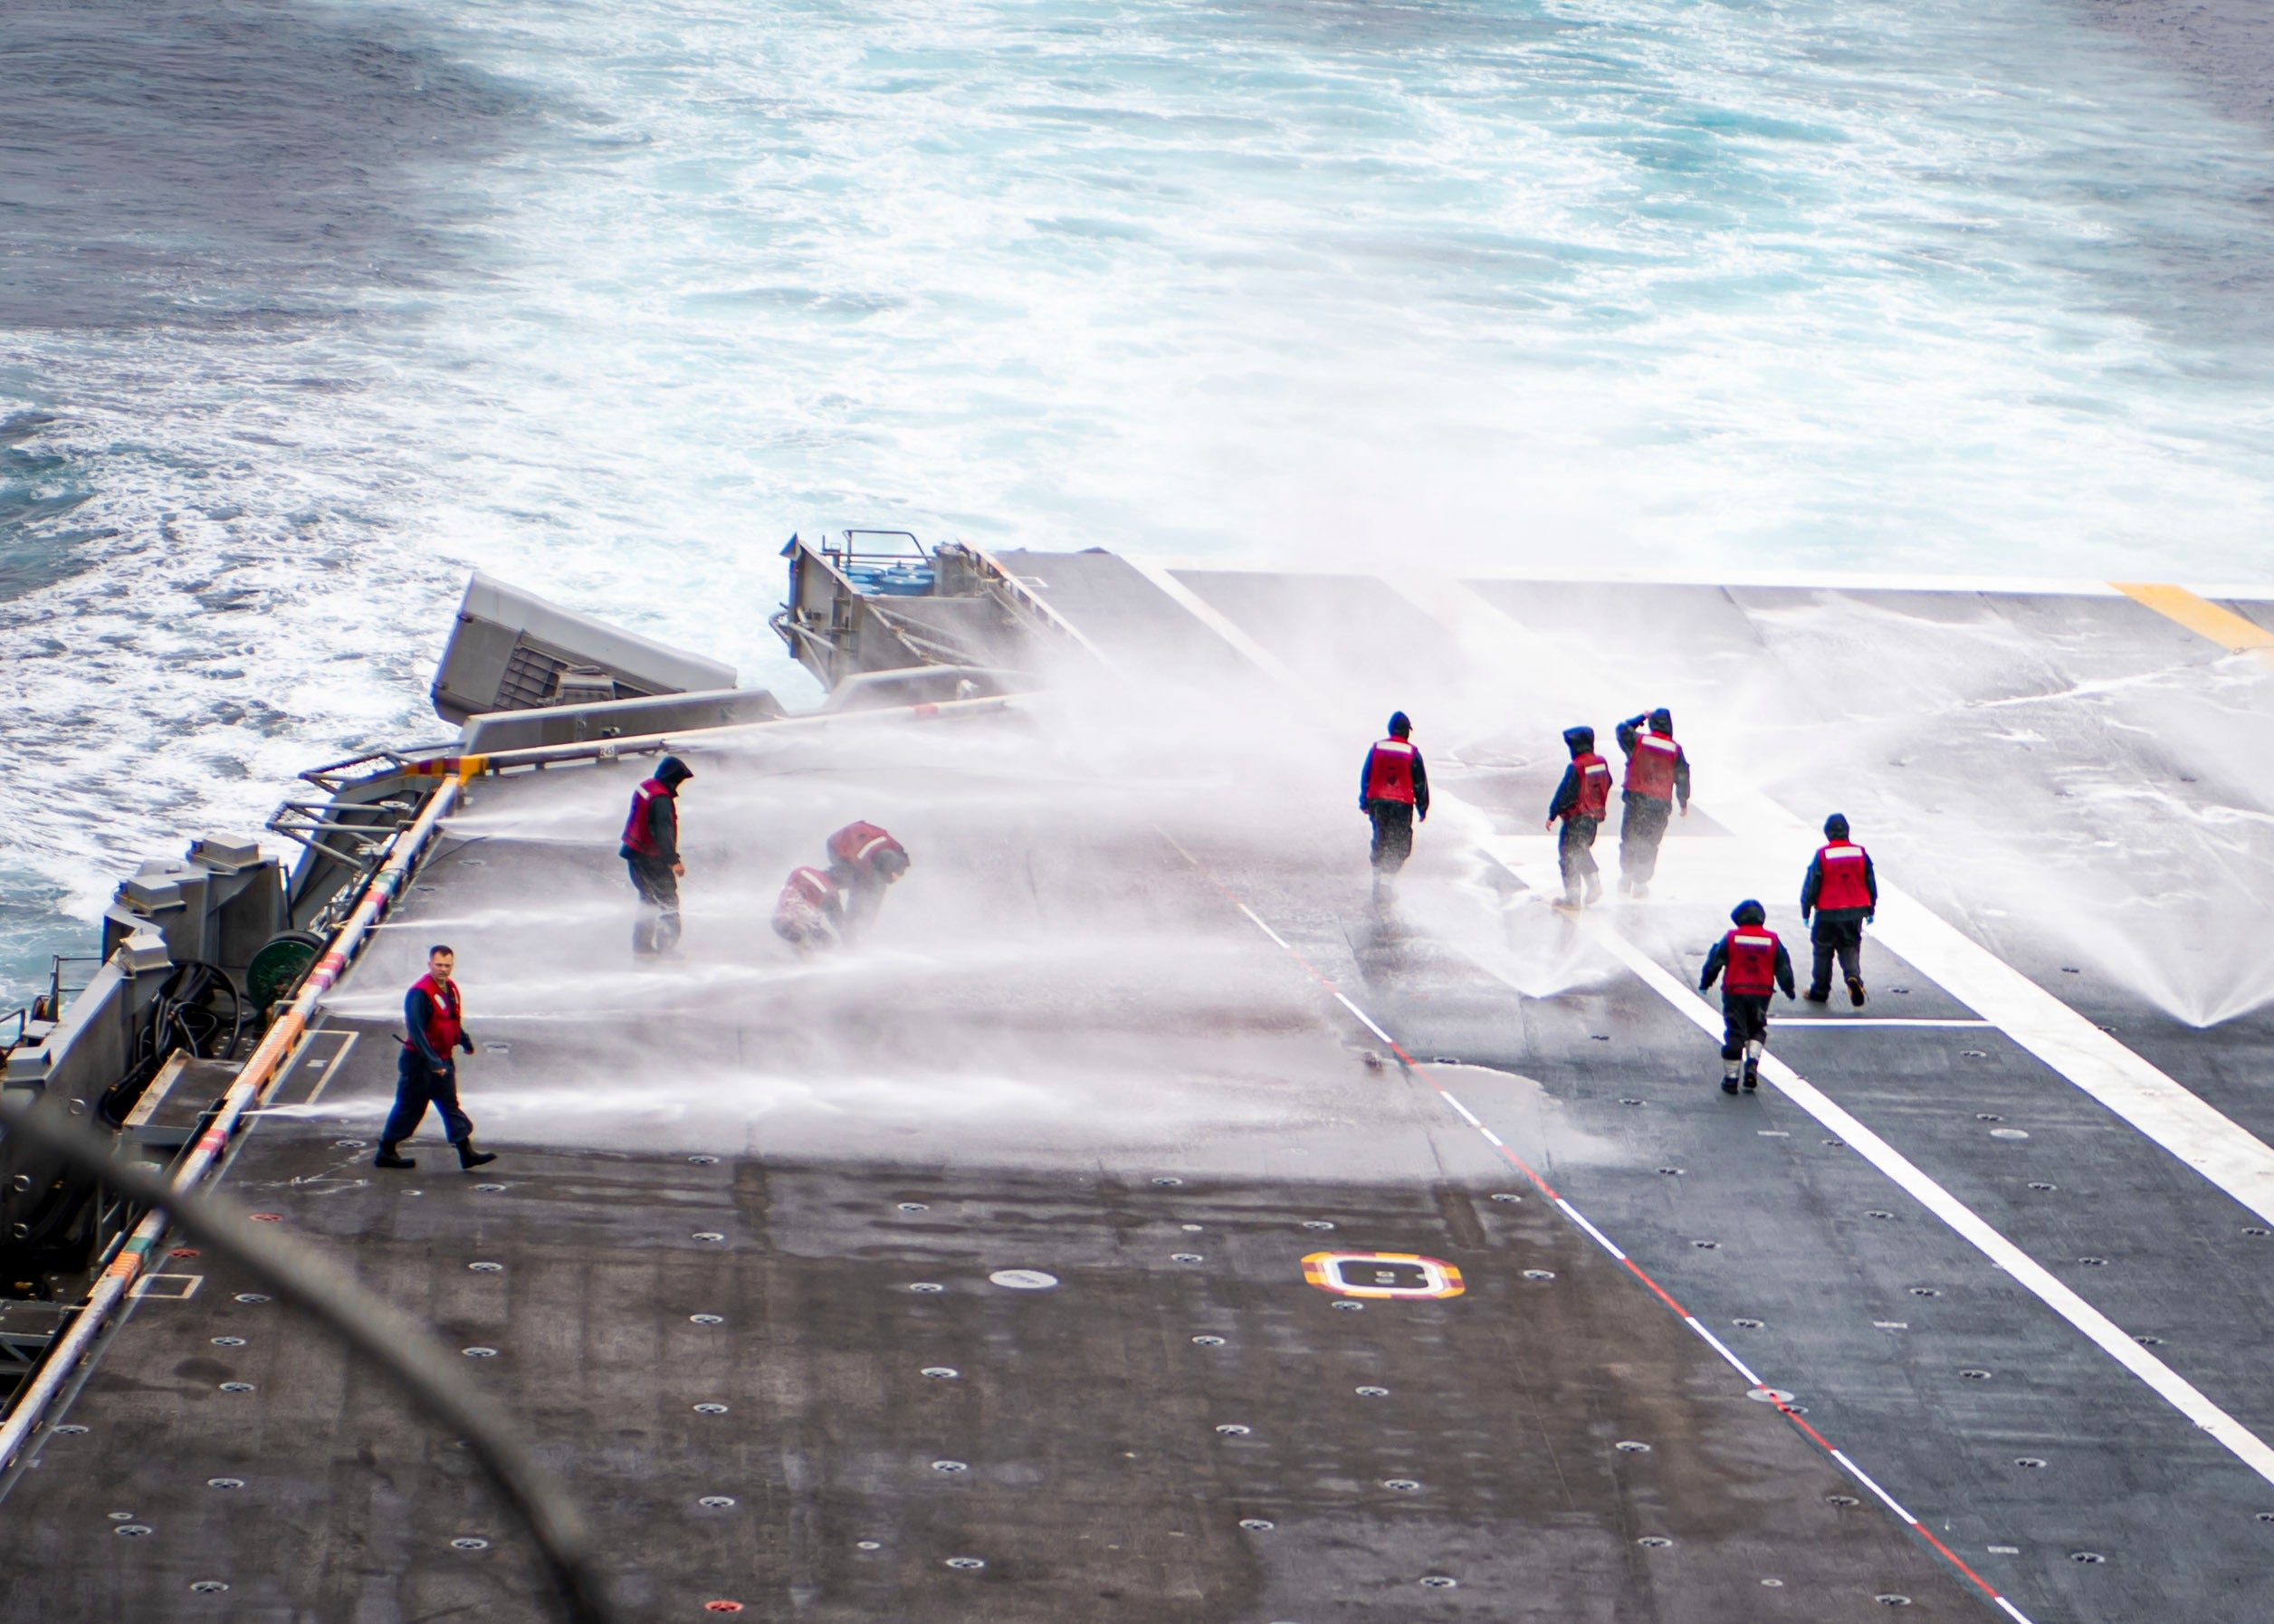 220914-N-XK462-1063 PACIFIC OCEAN (Sep. 14, 2022) Sailors conduct a counter measure washdown on the flight deck of the aircraft carrier USS Nimitz (CVN 68). Nimitz is underway conducting routine operations. (U.S. Navy photo by Mass Communication Specialist 3rd Class Hannah Kantner)